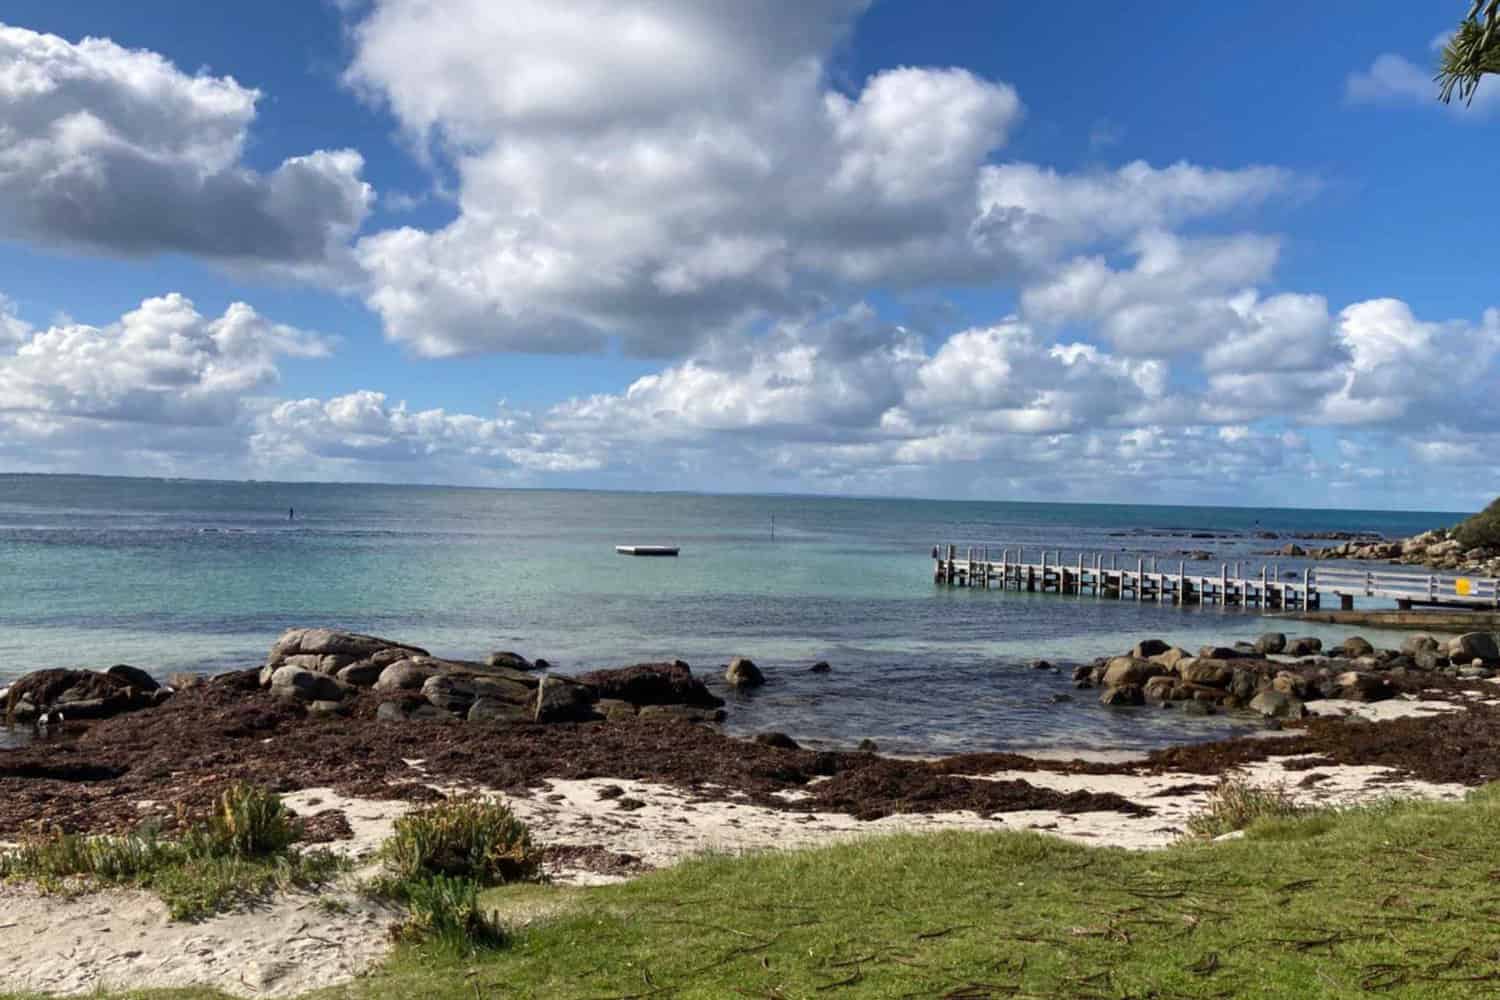 A tranquil view of Flinders Bay in Augusta, where a grassy shoreline adorned with rocks and seaweed leads to a calm sea, with a jetty extending into the water and a boat moored nearby, all under a dynamic sky of scattered clouds.